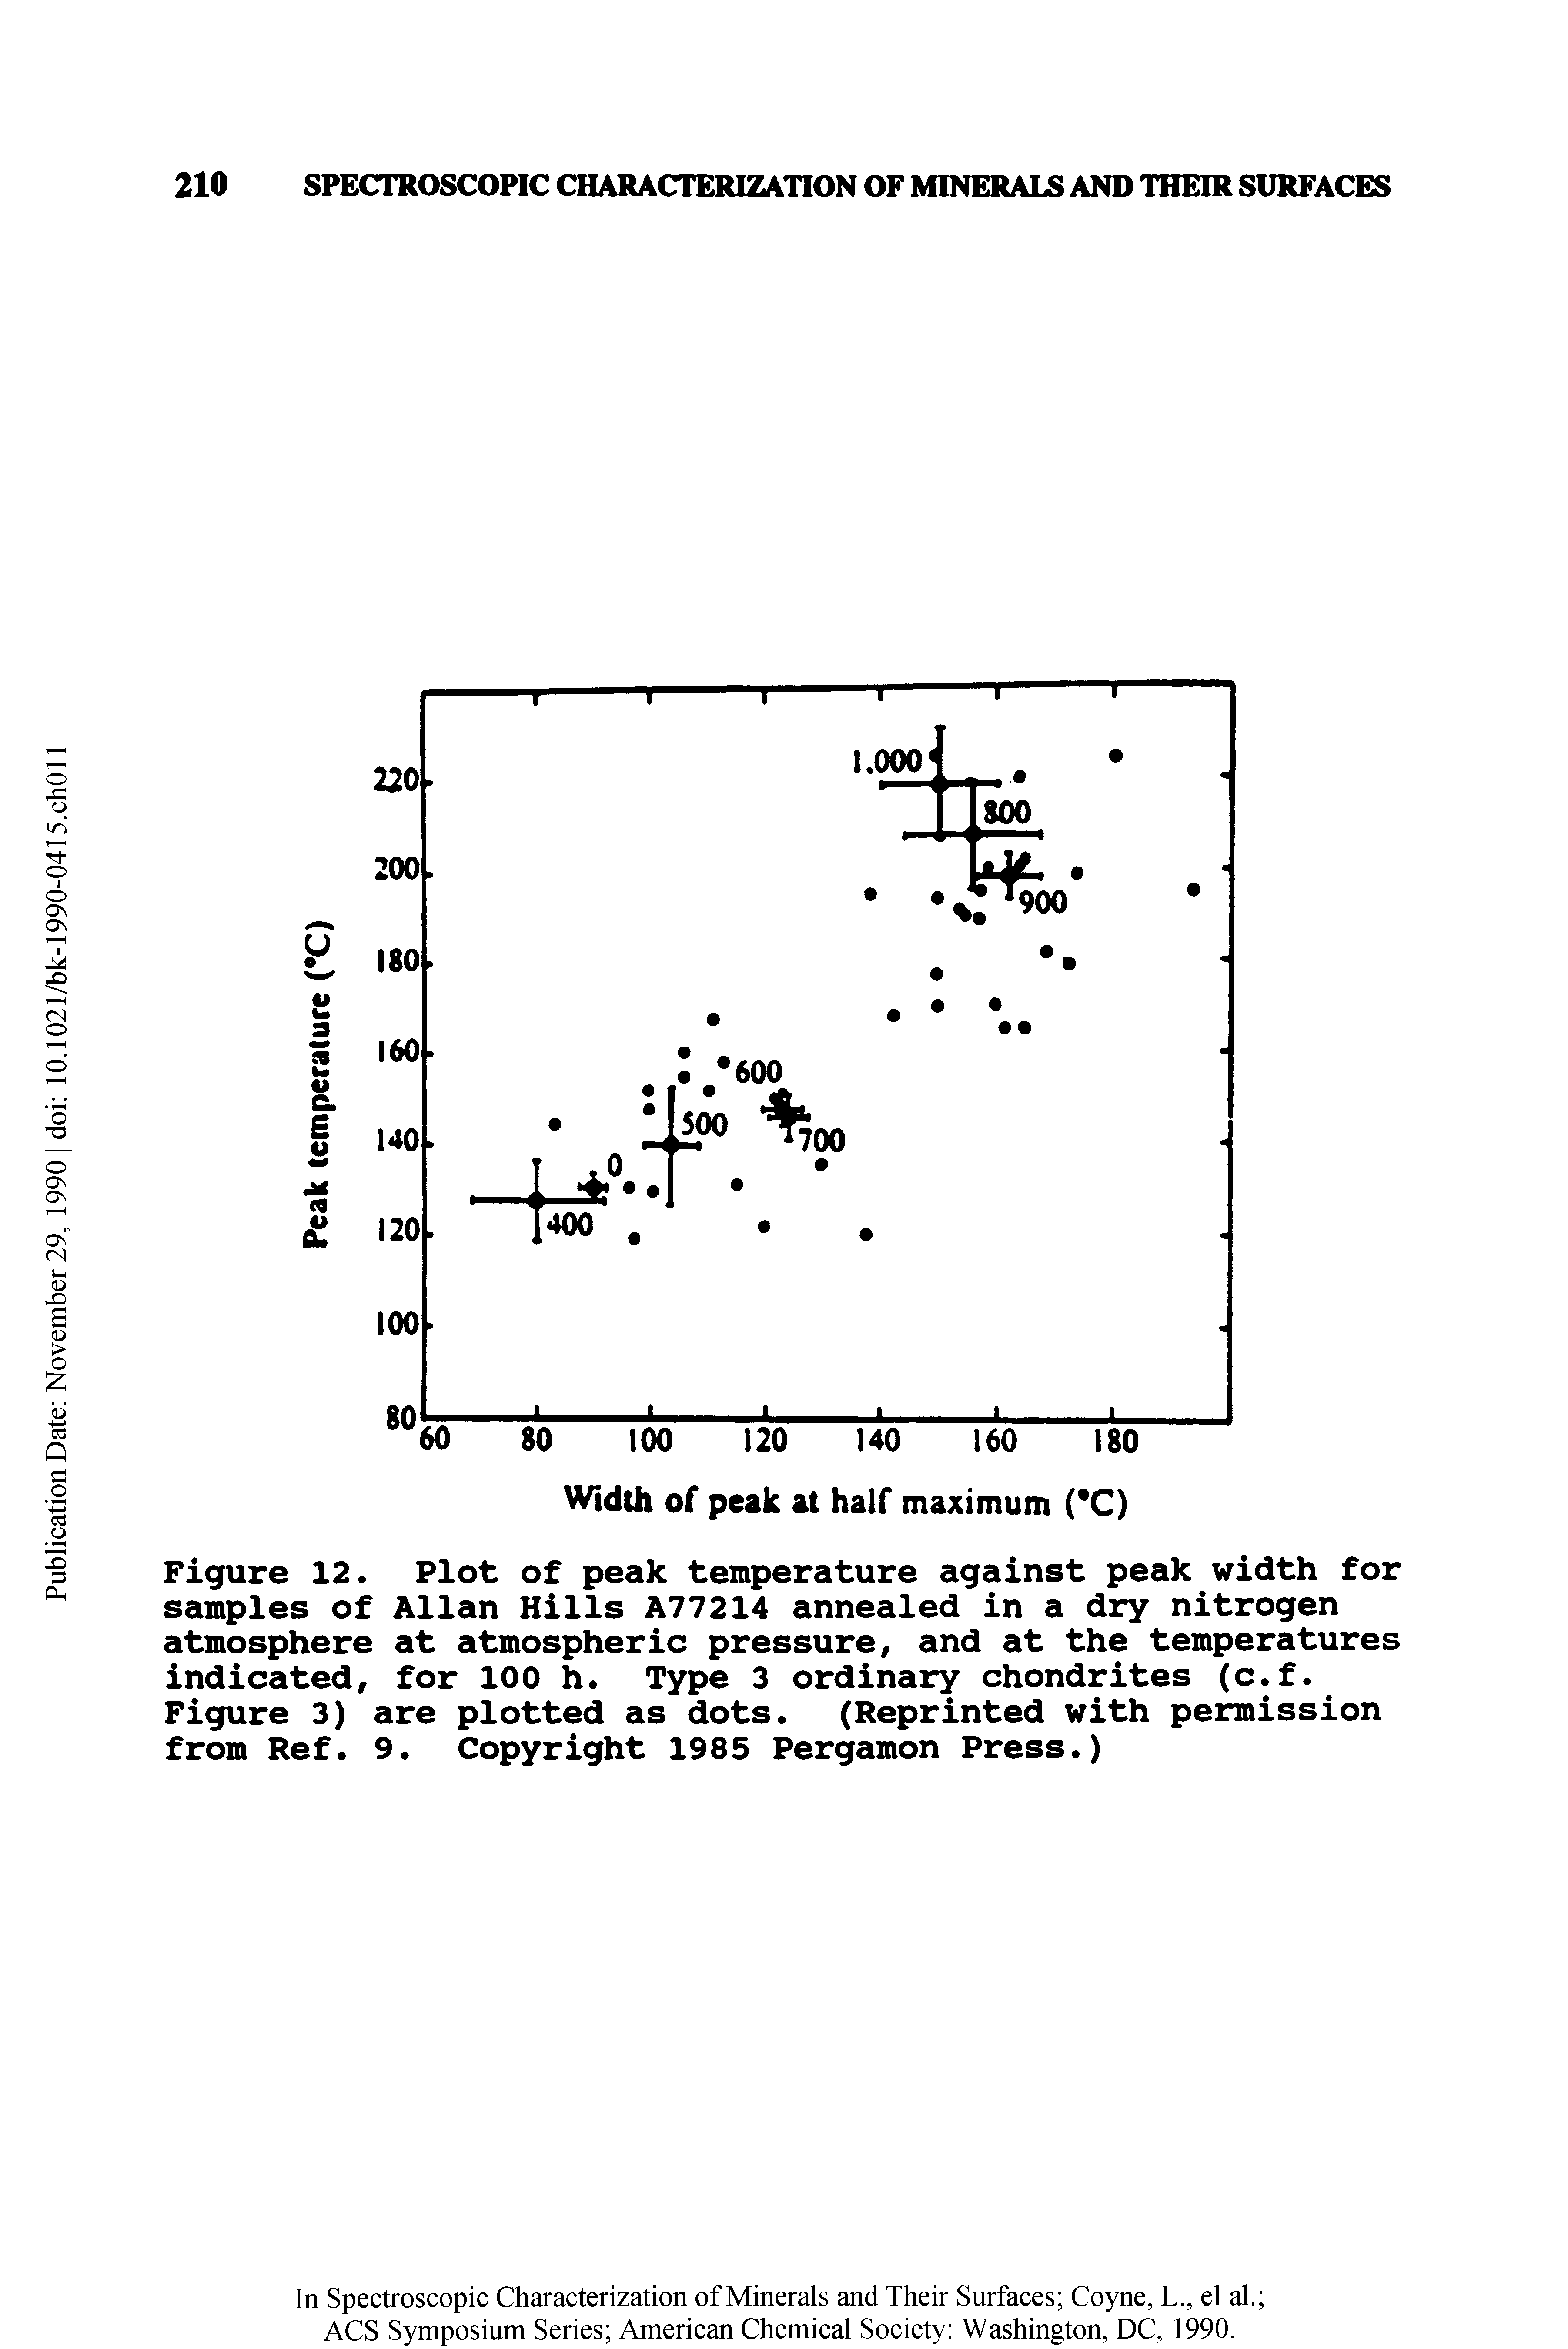 Figure 12. Plot of peak temperature against peak width for samples of Allan Hills A77214 annealed in a dry nitrogen atmosphere at atmospheric pressure, and at the temperatures indicated, for 100 h. Type 3 ordinary chondrites (c.f. Figure 3) are plotted as dots. (Reprinted with permission from Ref. 9. Copyright 1985 Pergamon Press.)...